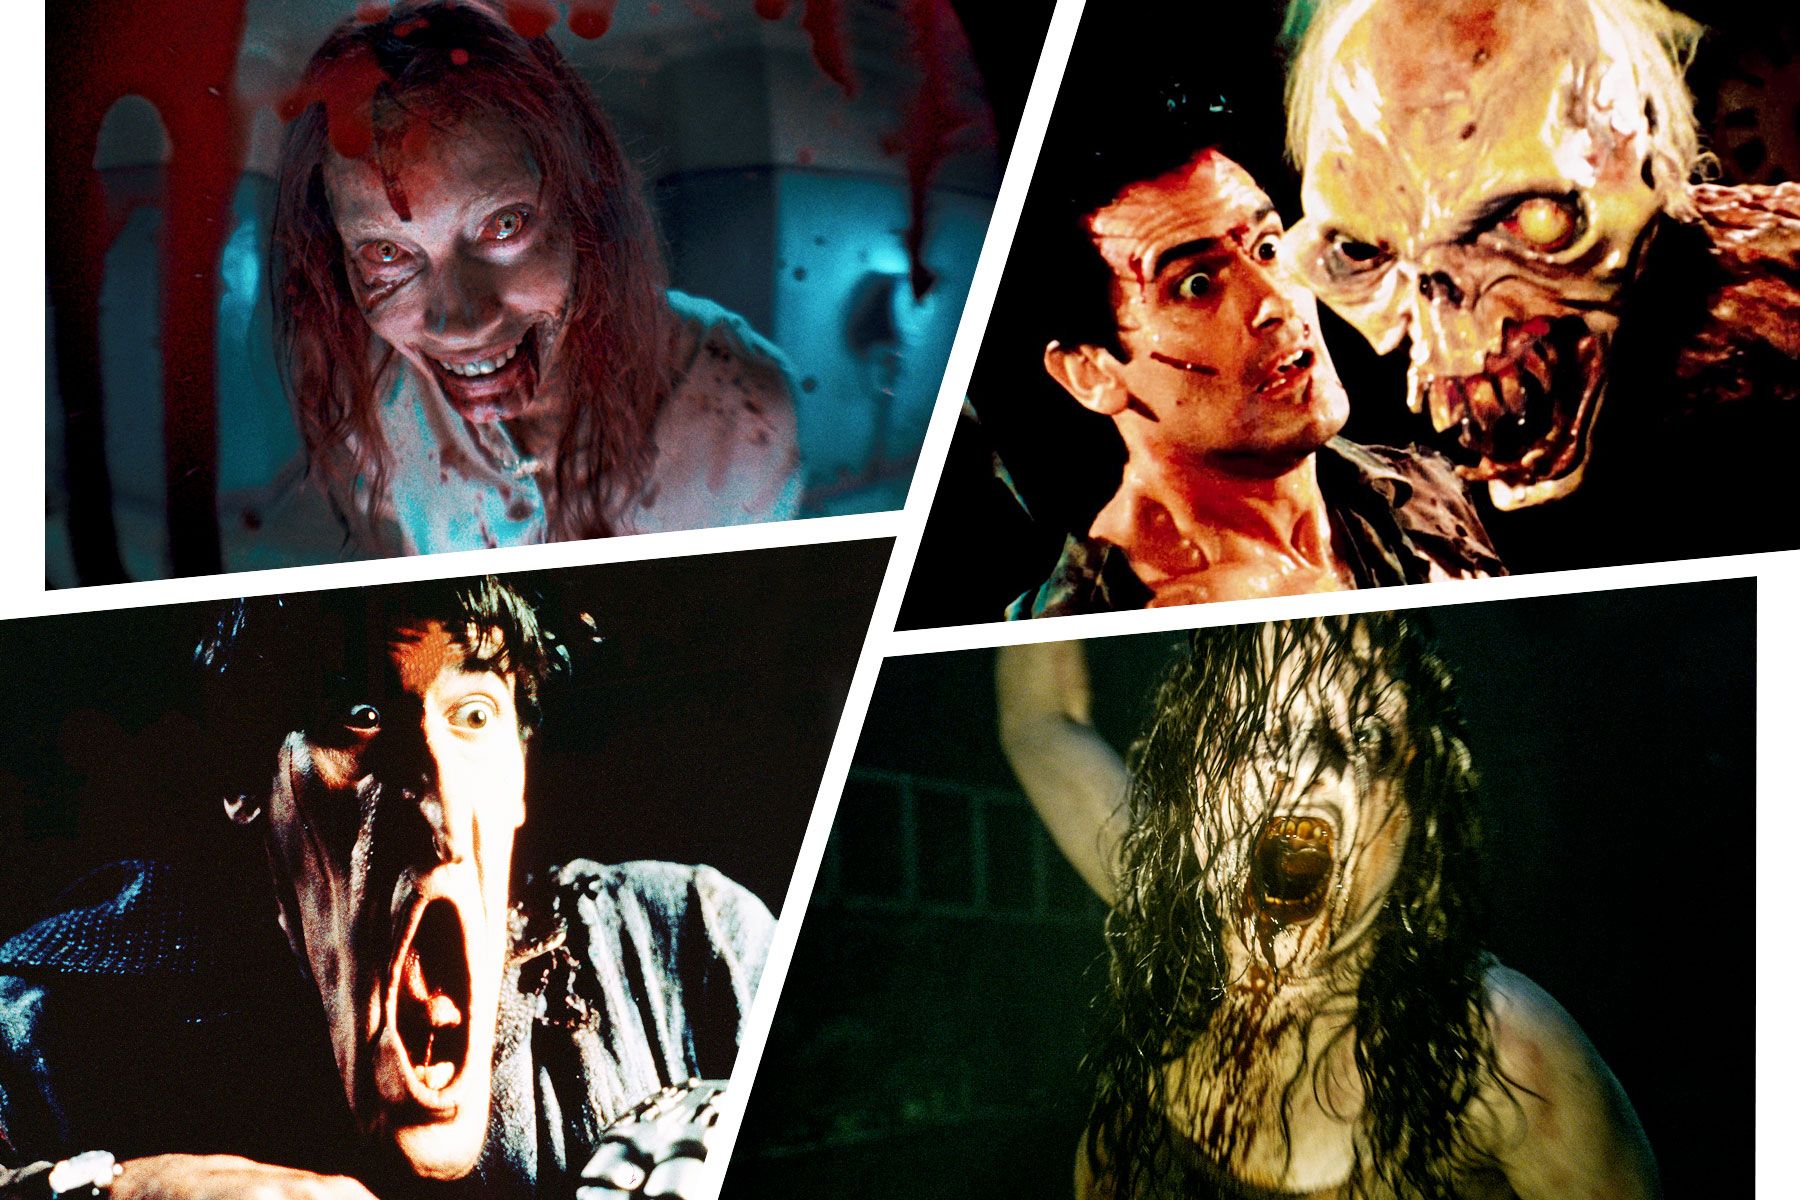 Things Evil Dead Rise Does Better Than The Other Entries In The